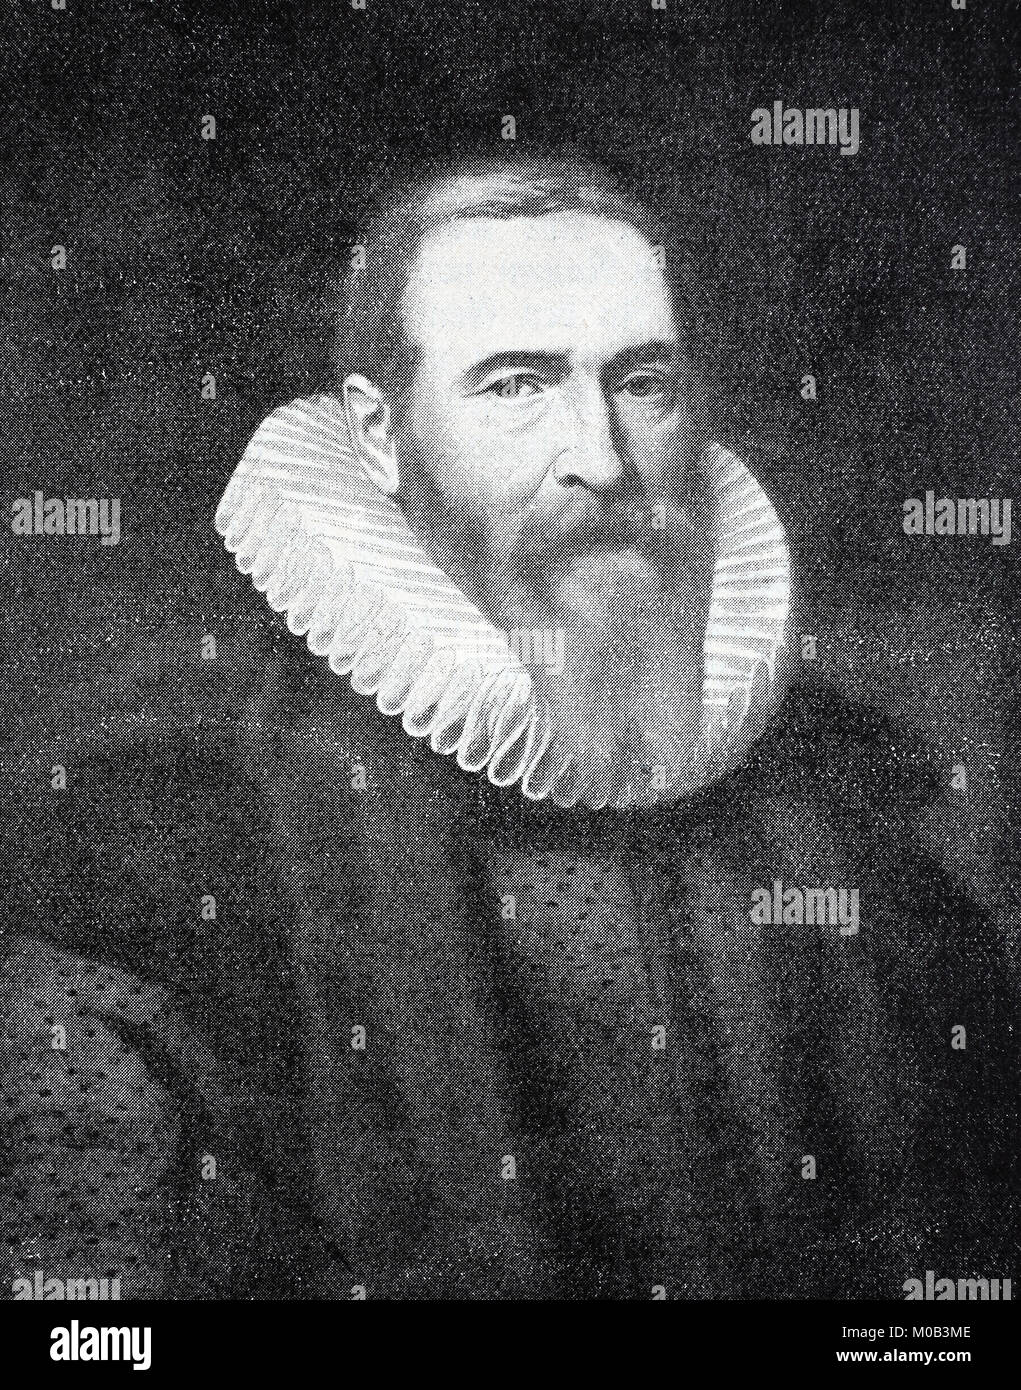 Johan van Oldenbarnevelt, 14 September 1547 - 13 May 1619, was a Dutch statesman and is regarded as the founder of the Republic of the United Netherlands, digital improved reproduction of an original print from 1880 Stock Photo